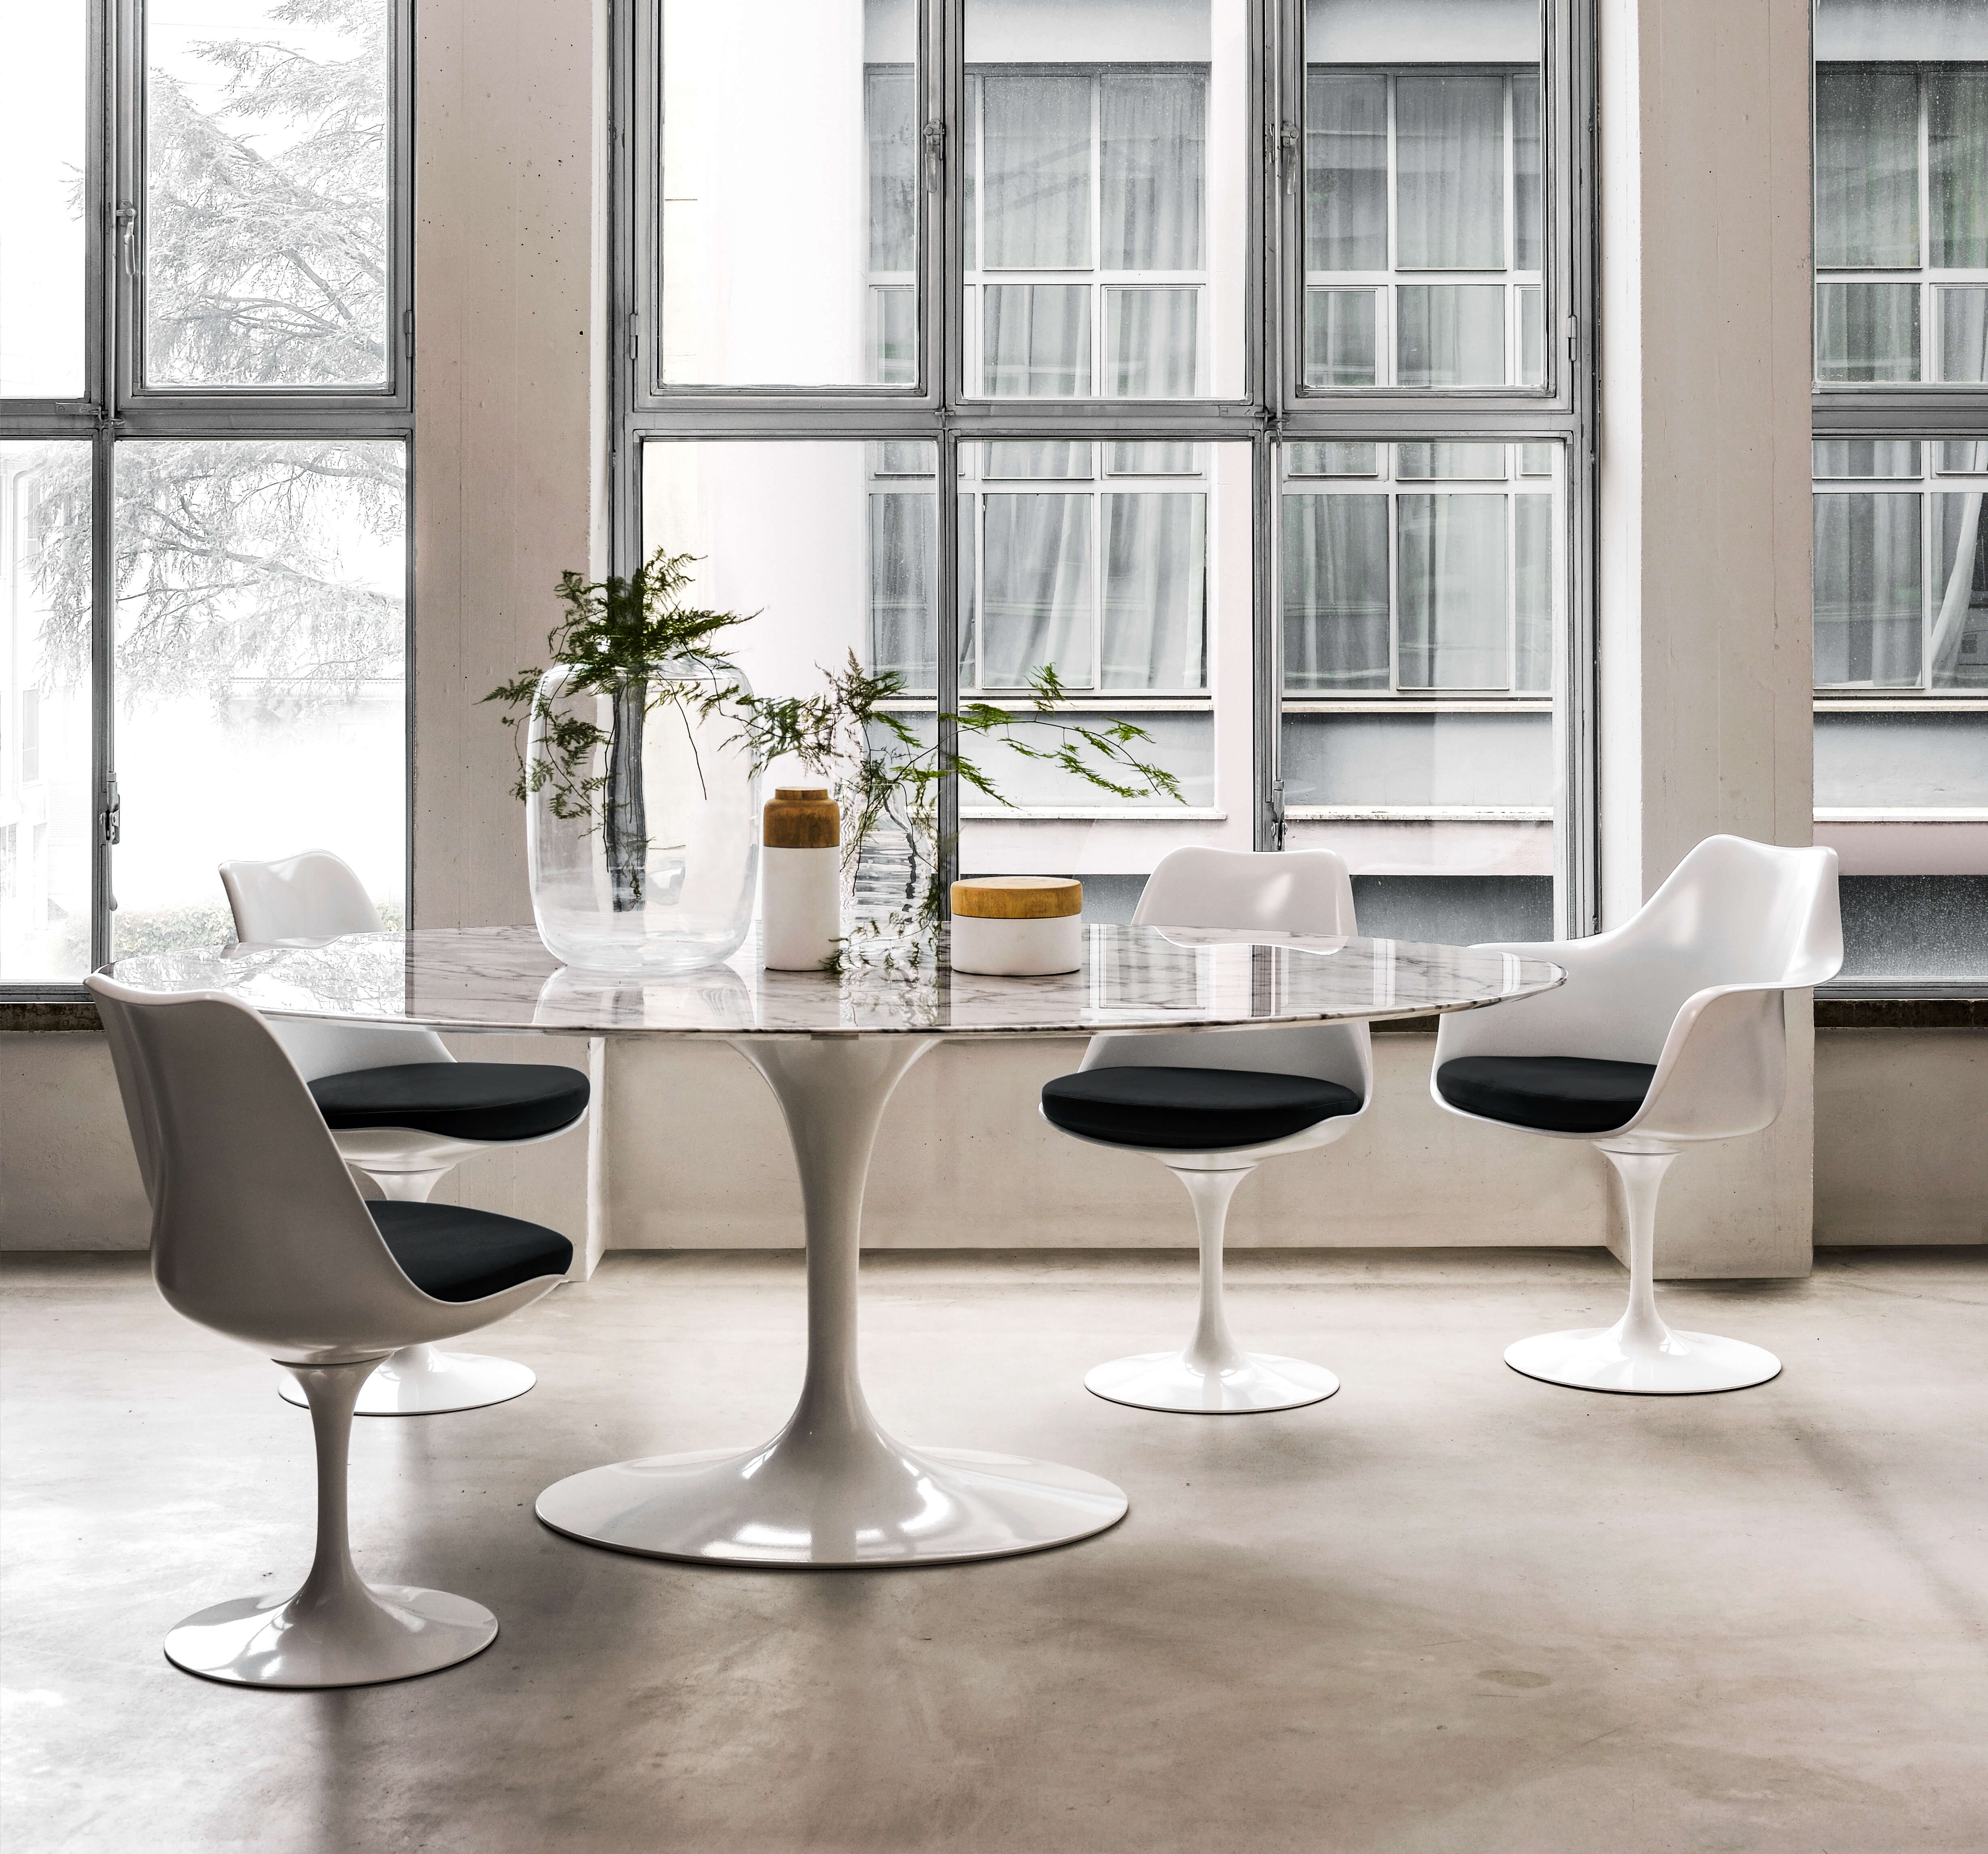 A laminate and marble table designed by midcentury modernist Eero Saarinen | Corcoran